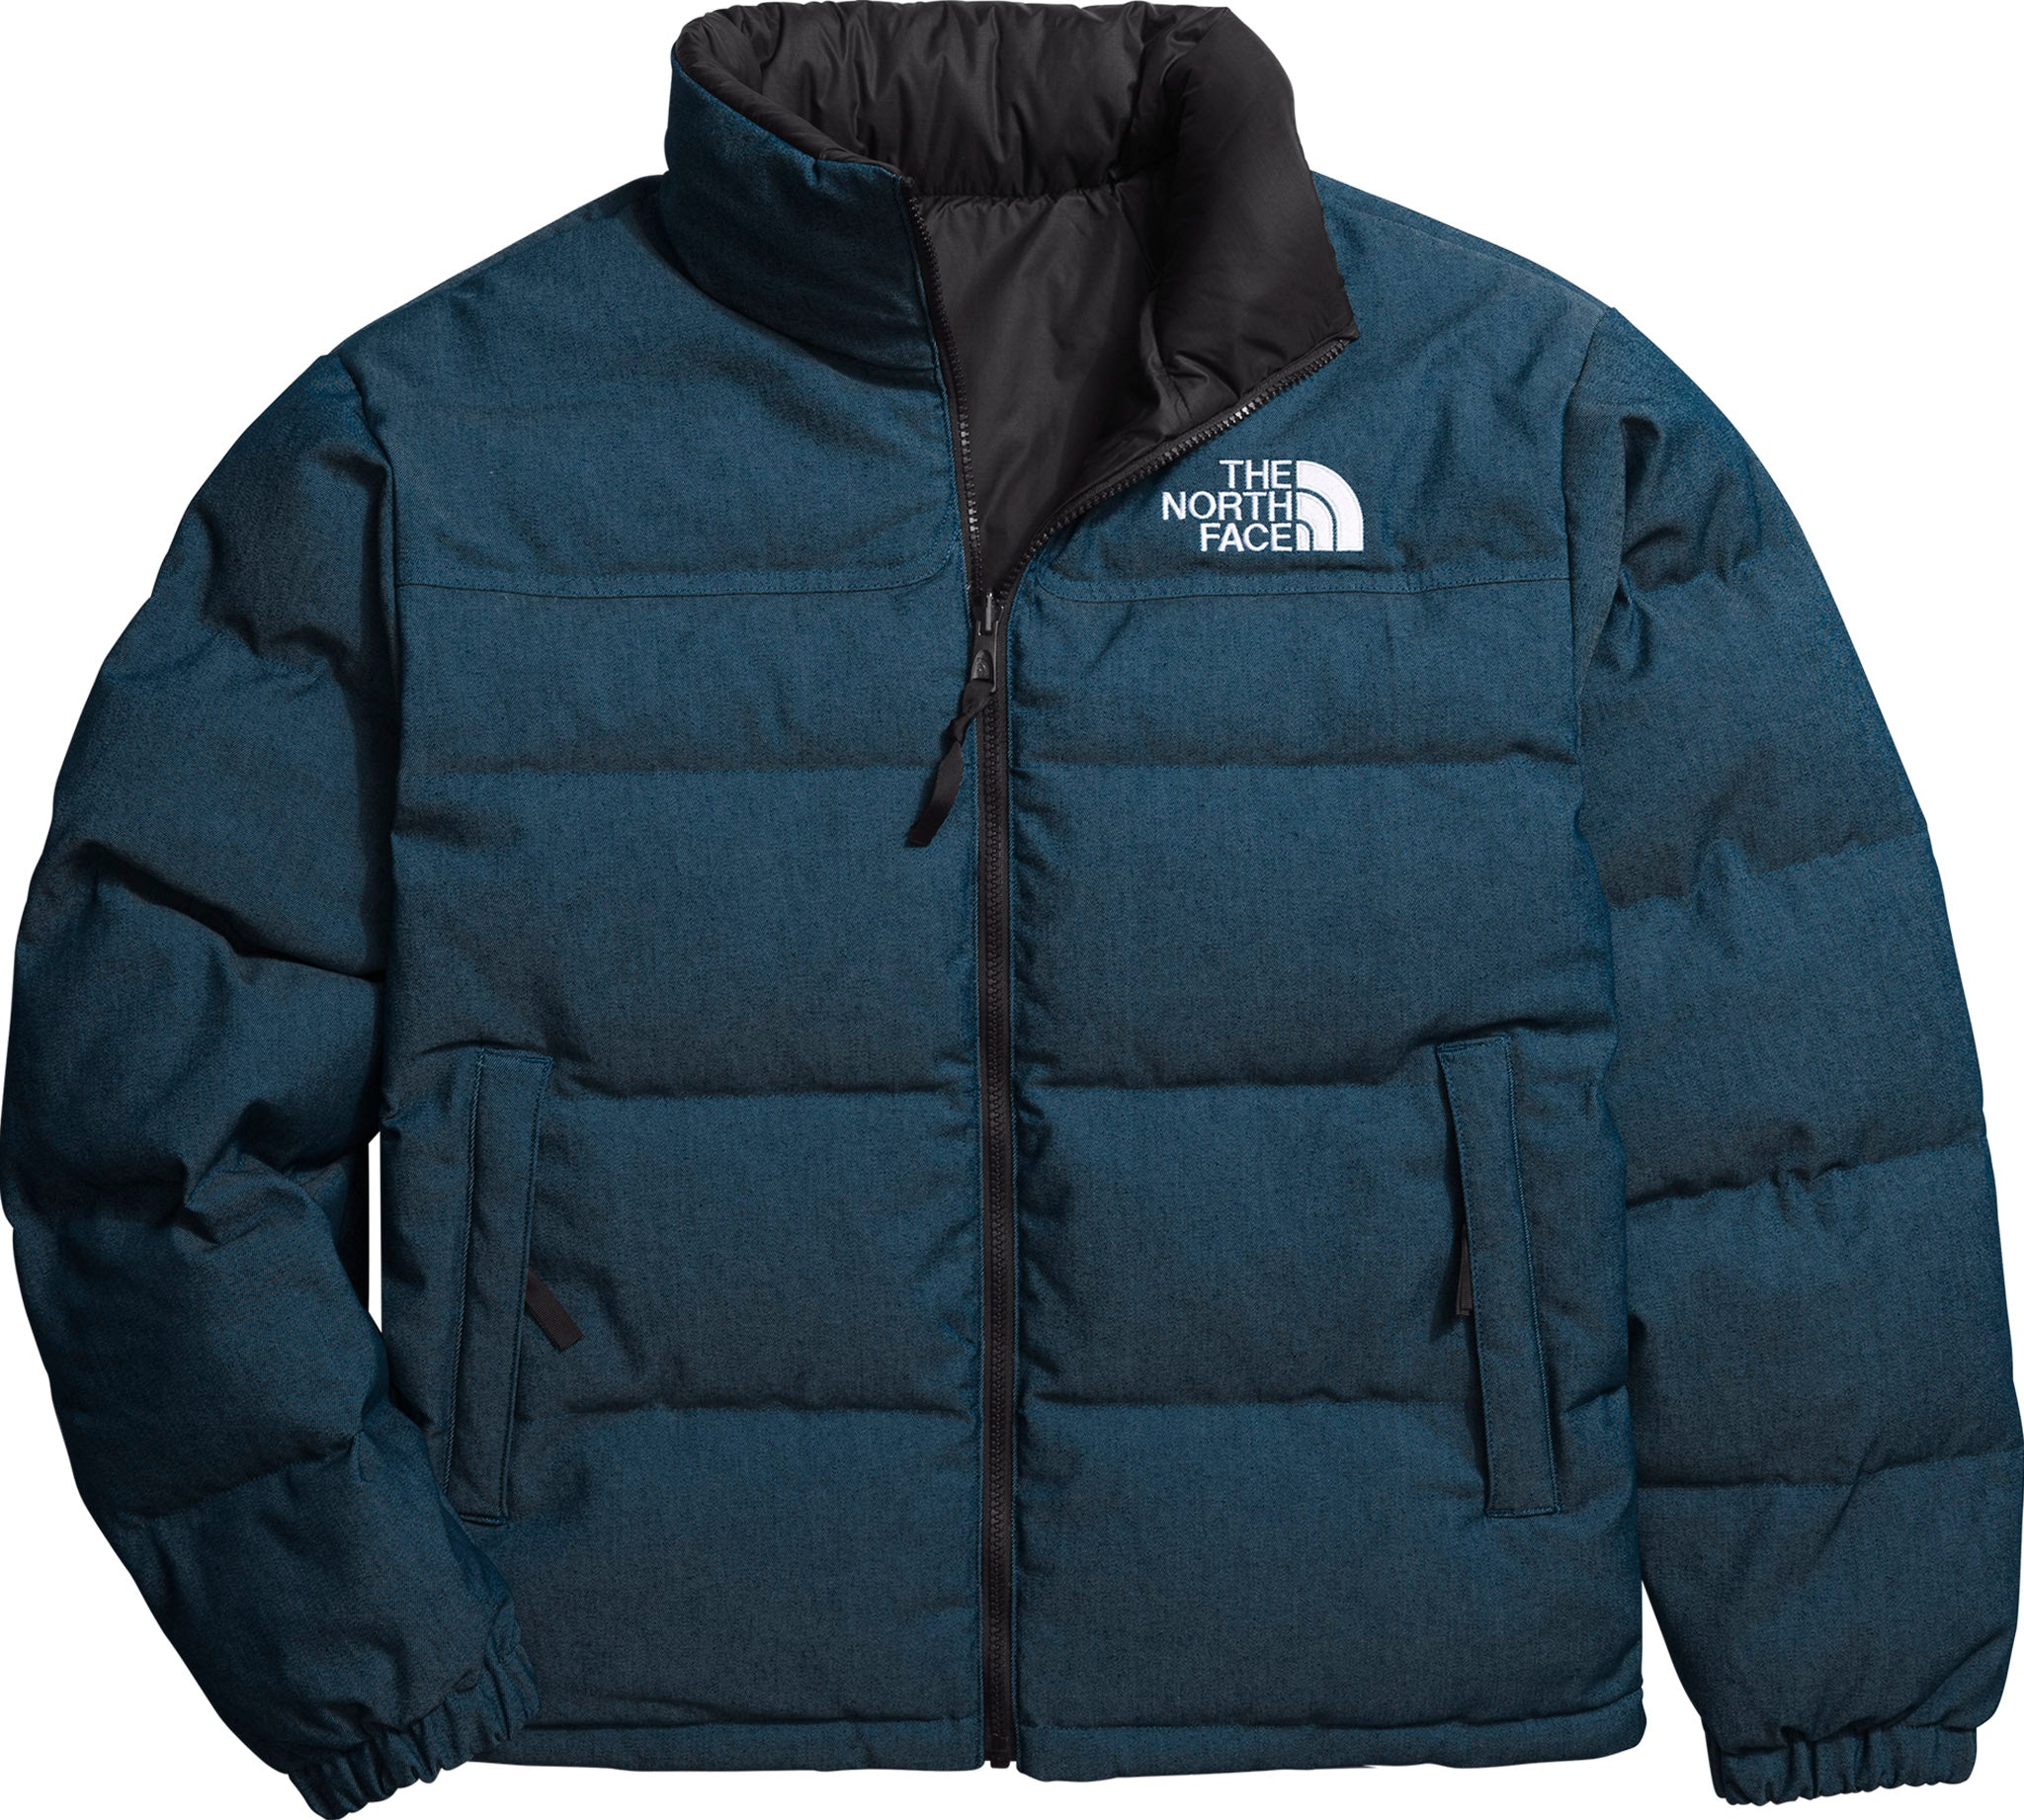 The North Face Canada: Jackets, Gear & Accessories | Altitude Sports